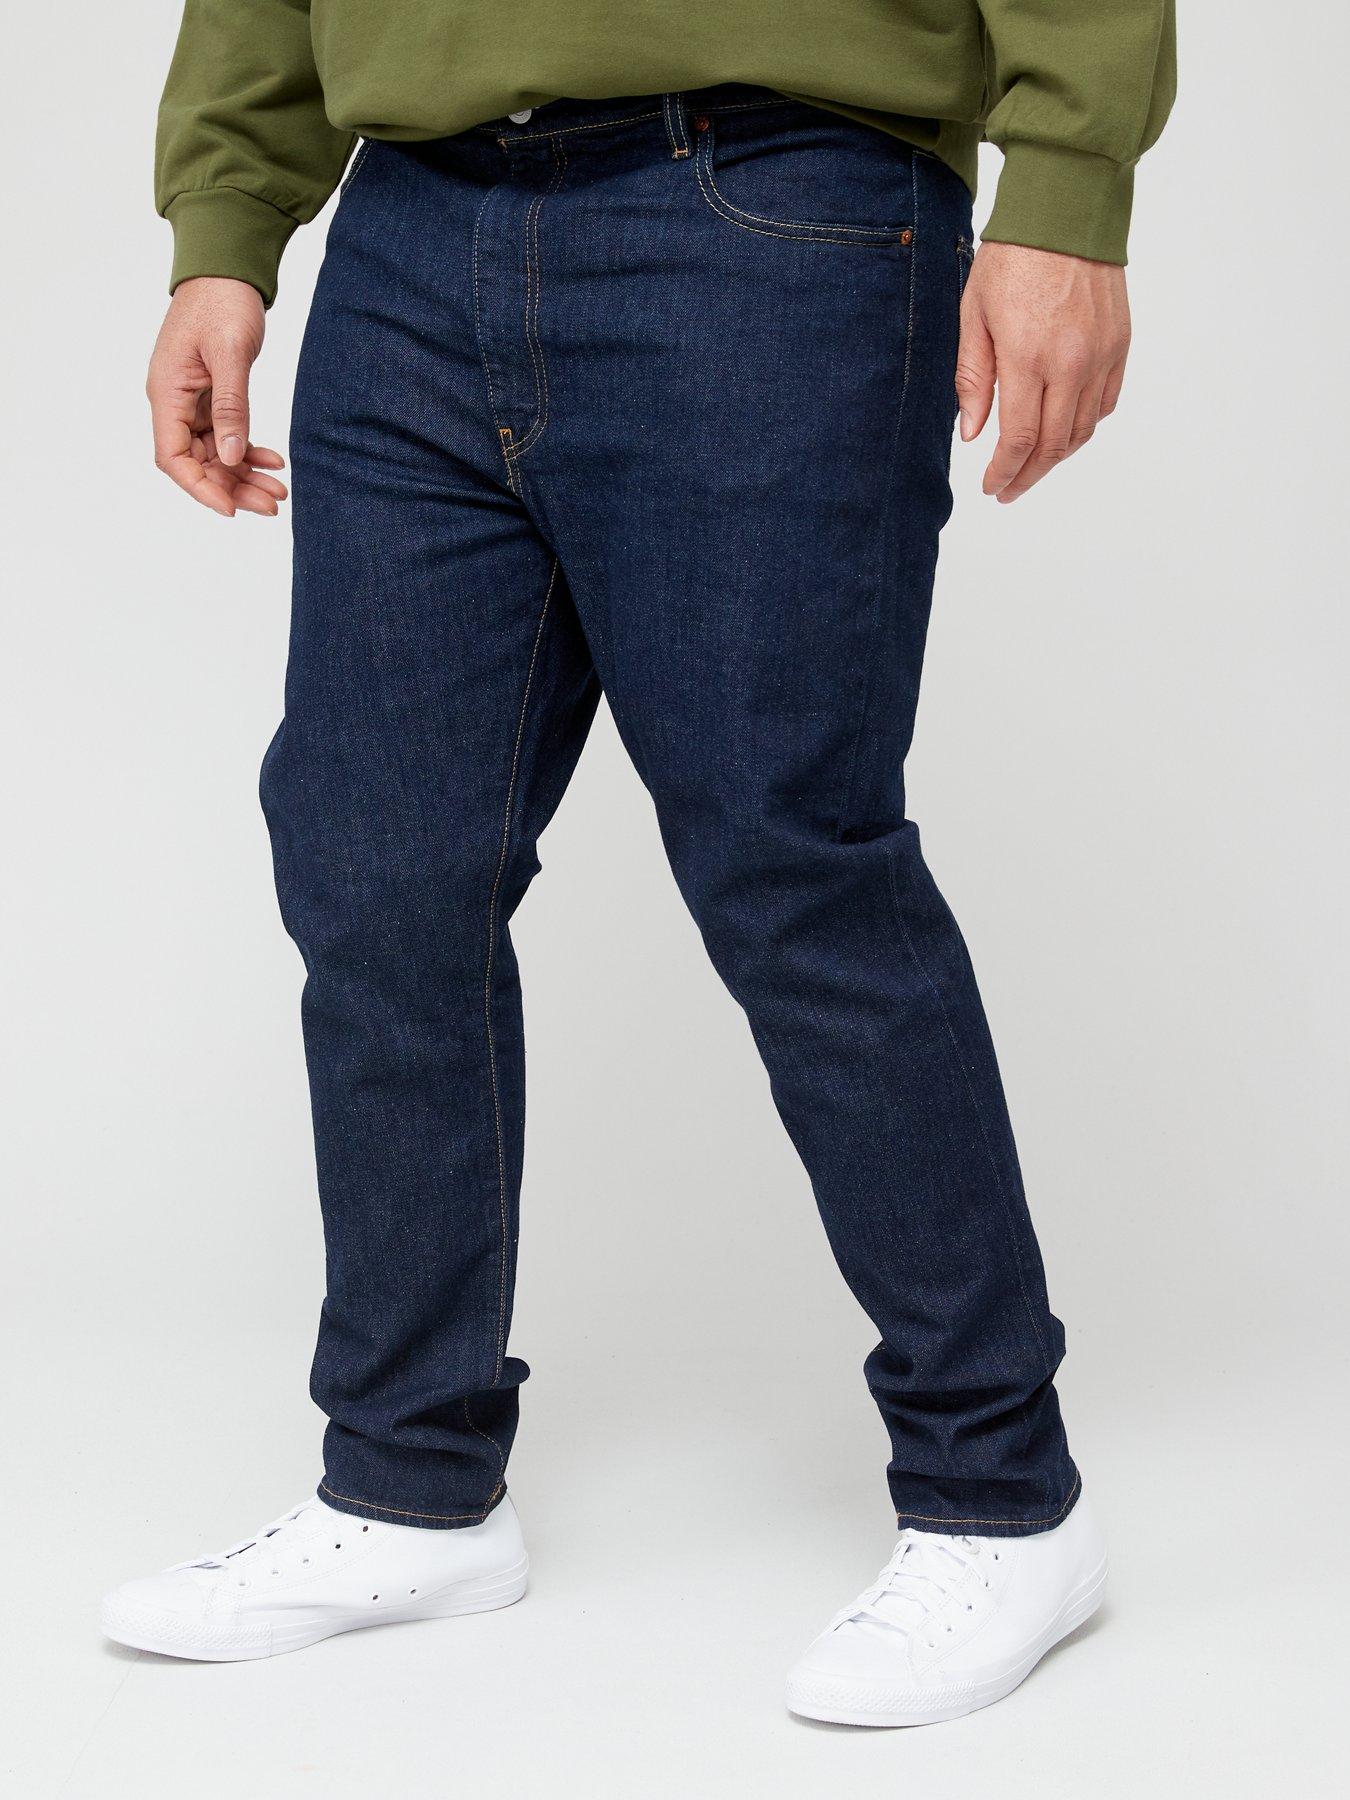 Levi's 512 Slim Taper Jeans (Clean Hands) Available at Irish UK